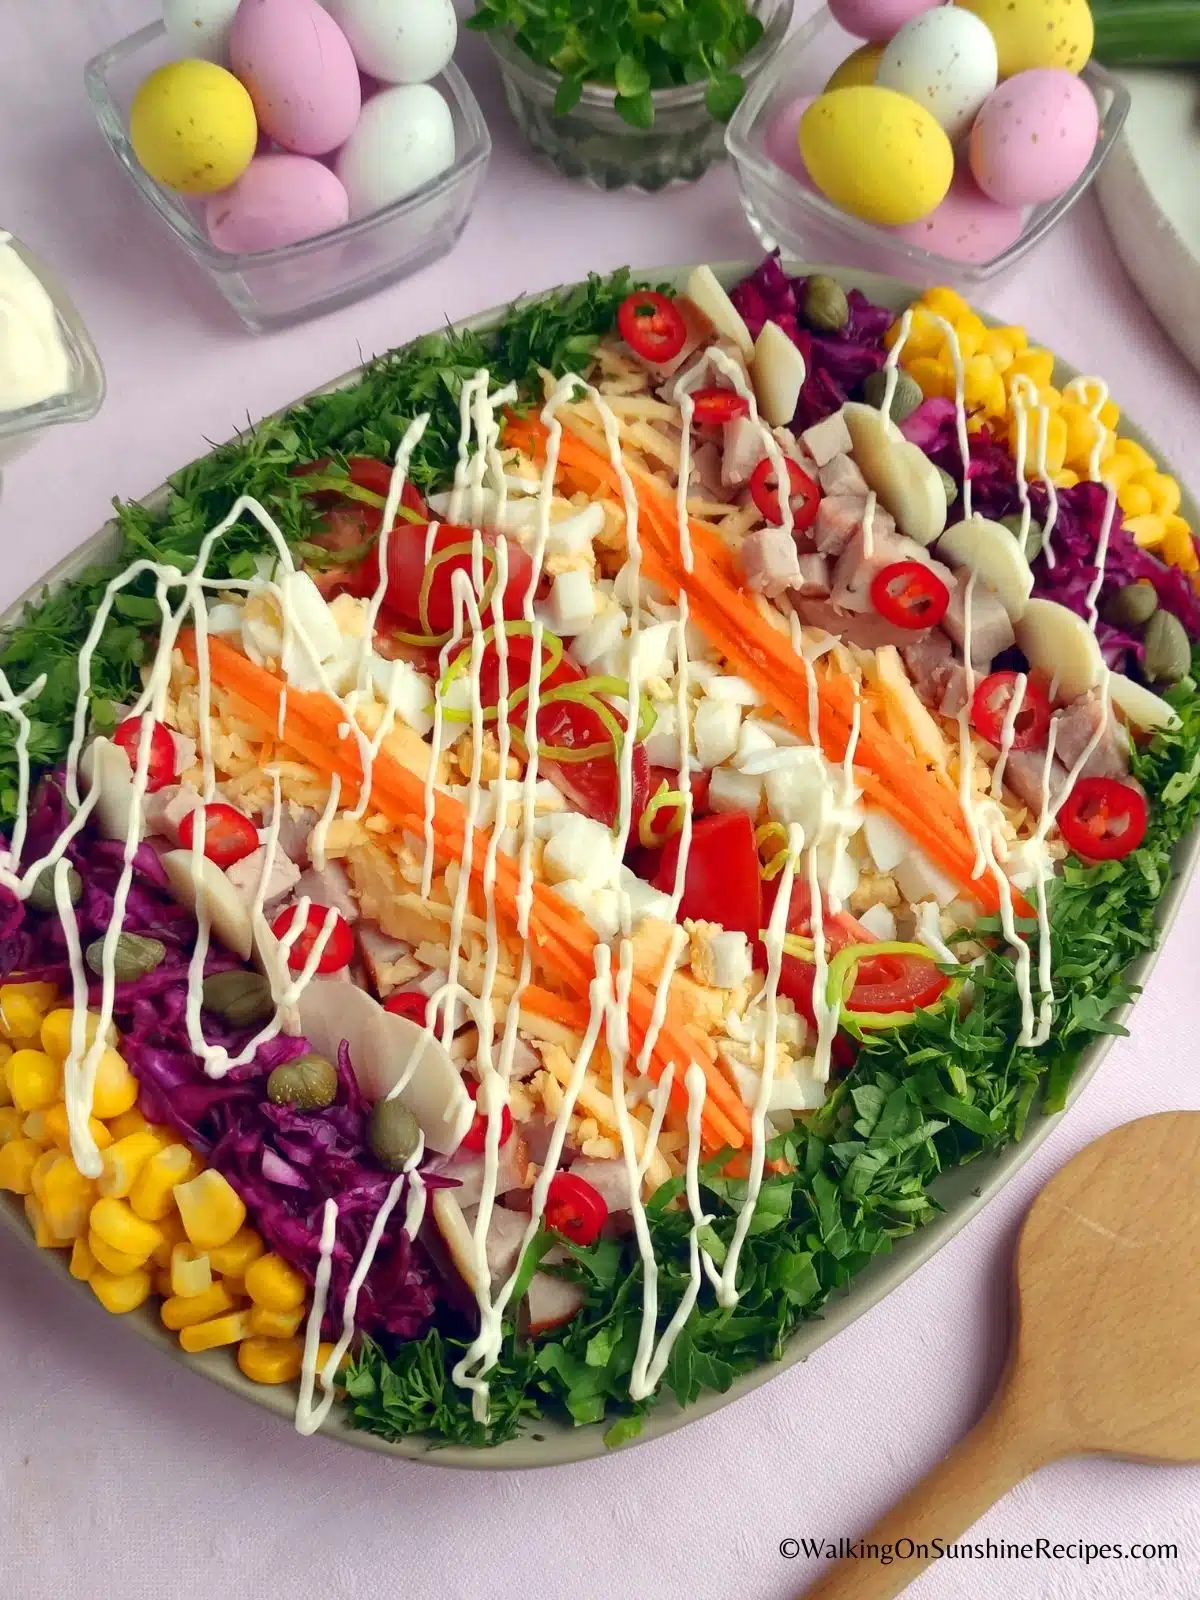 Salad with assorted vegetables and lettuce.